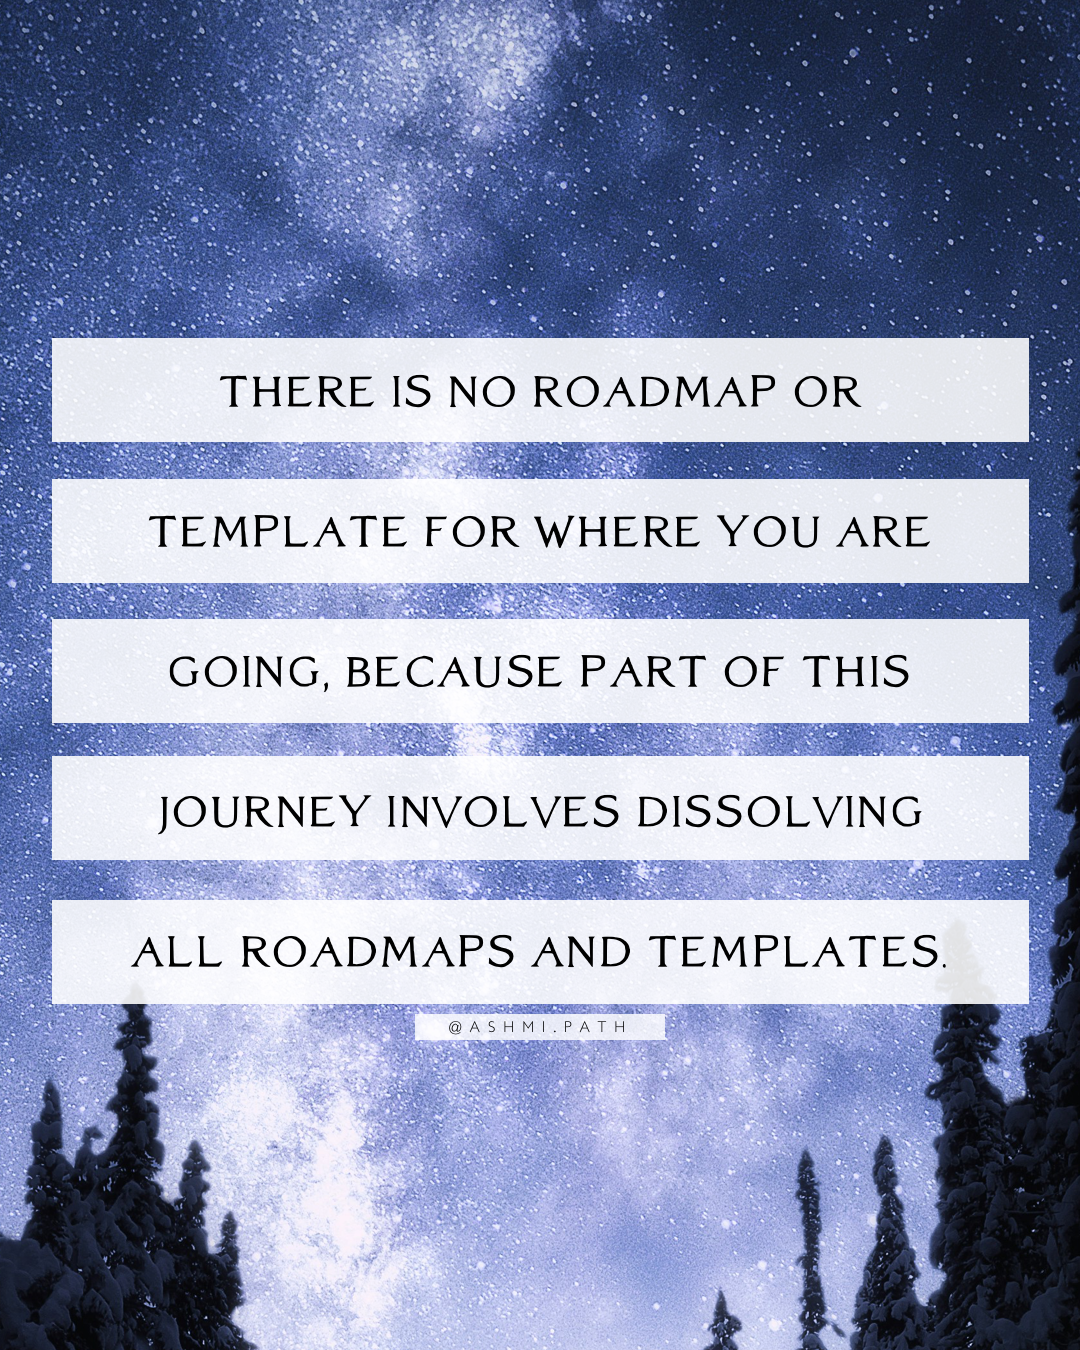 Why There is no Roadmap For Where You Are Going